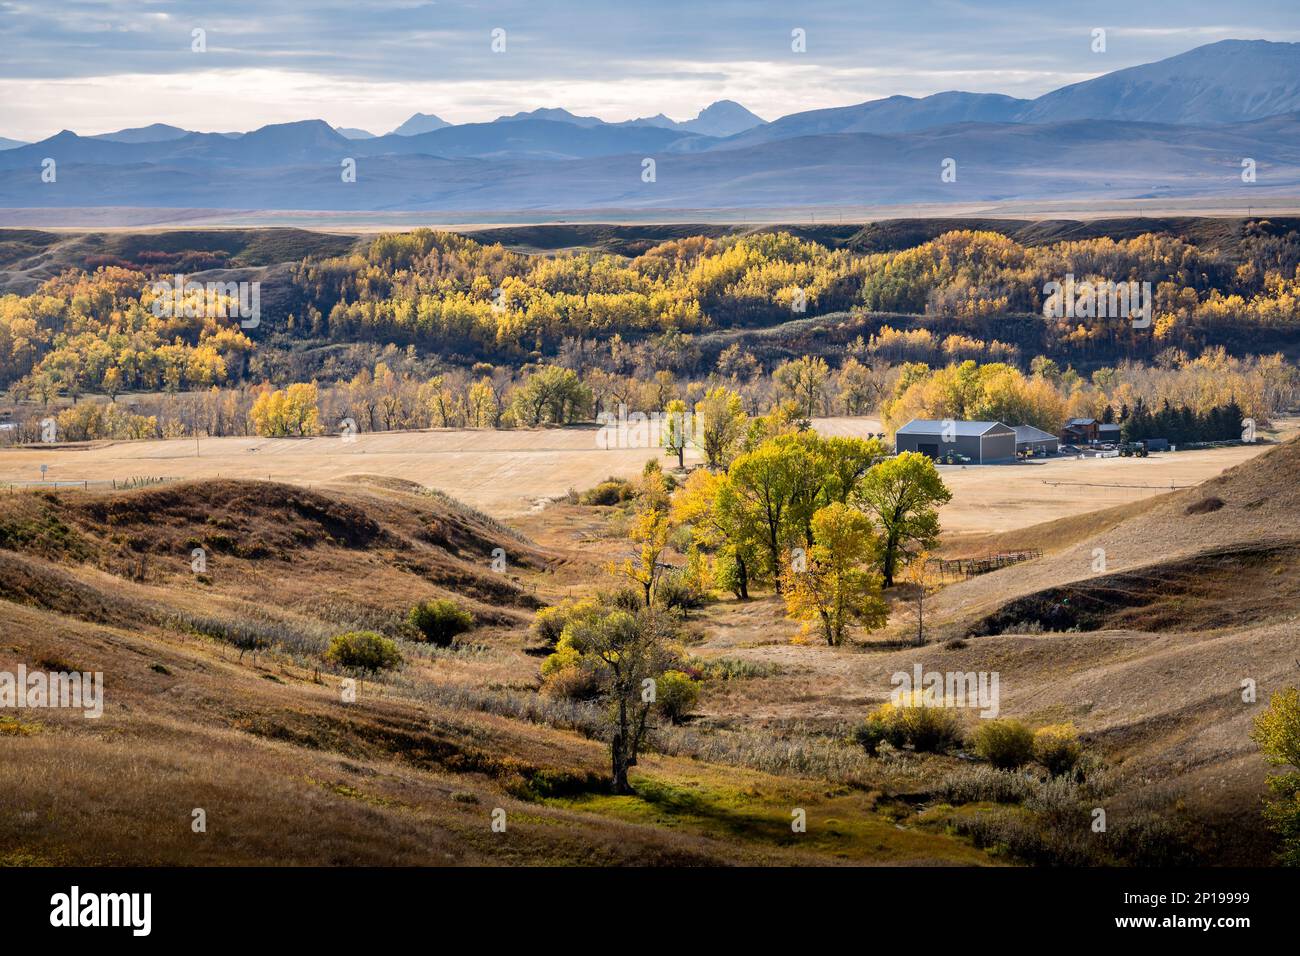 Autumn colours in a river valley overlooking the East Slopes of the Canadian Rocky Mountains and a working cattle ranch near Longview Alberta. Stock Photo